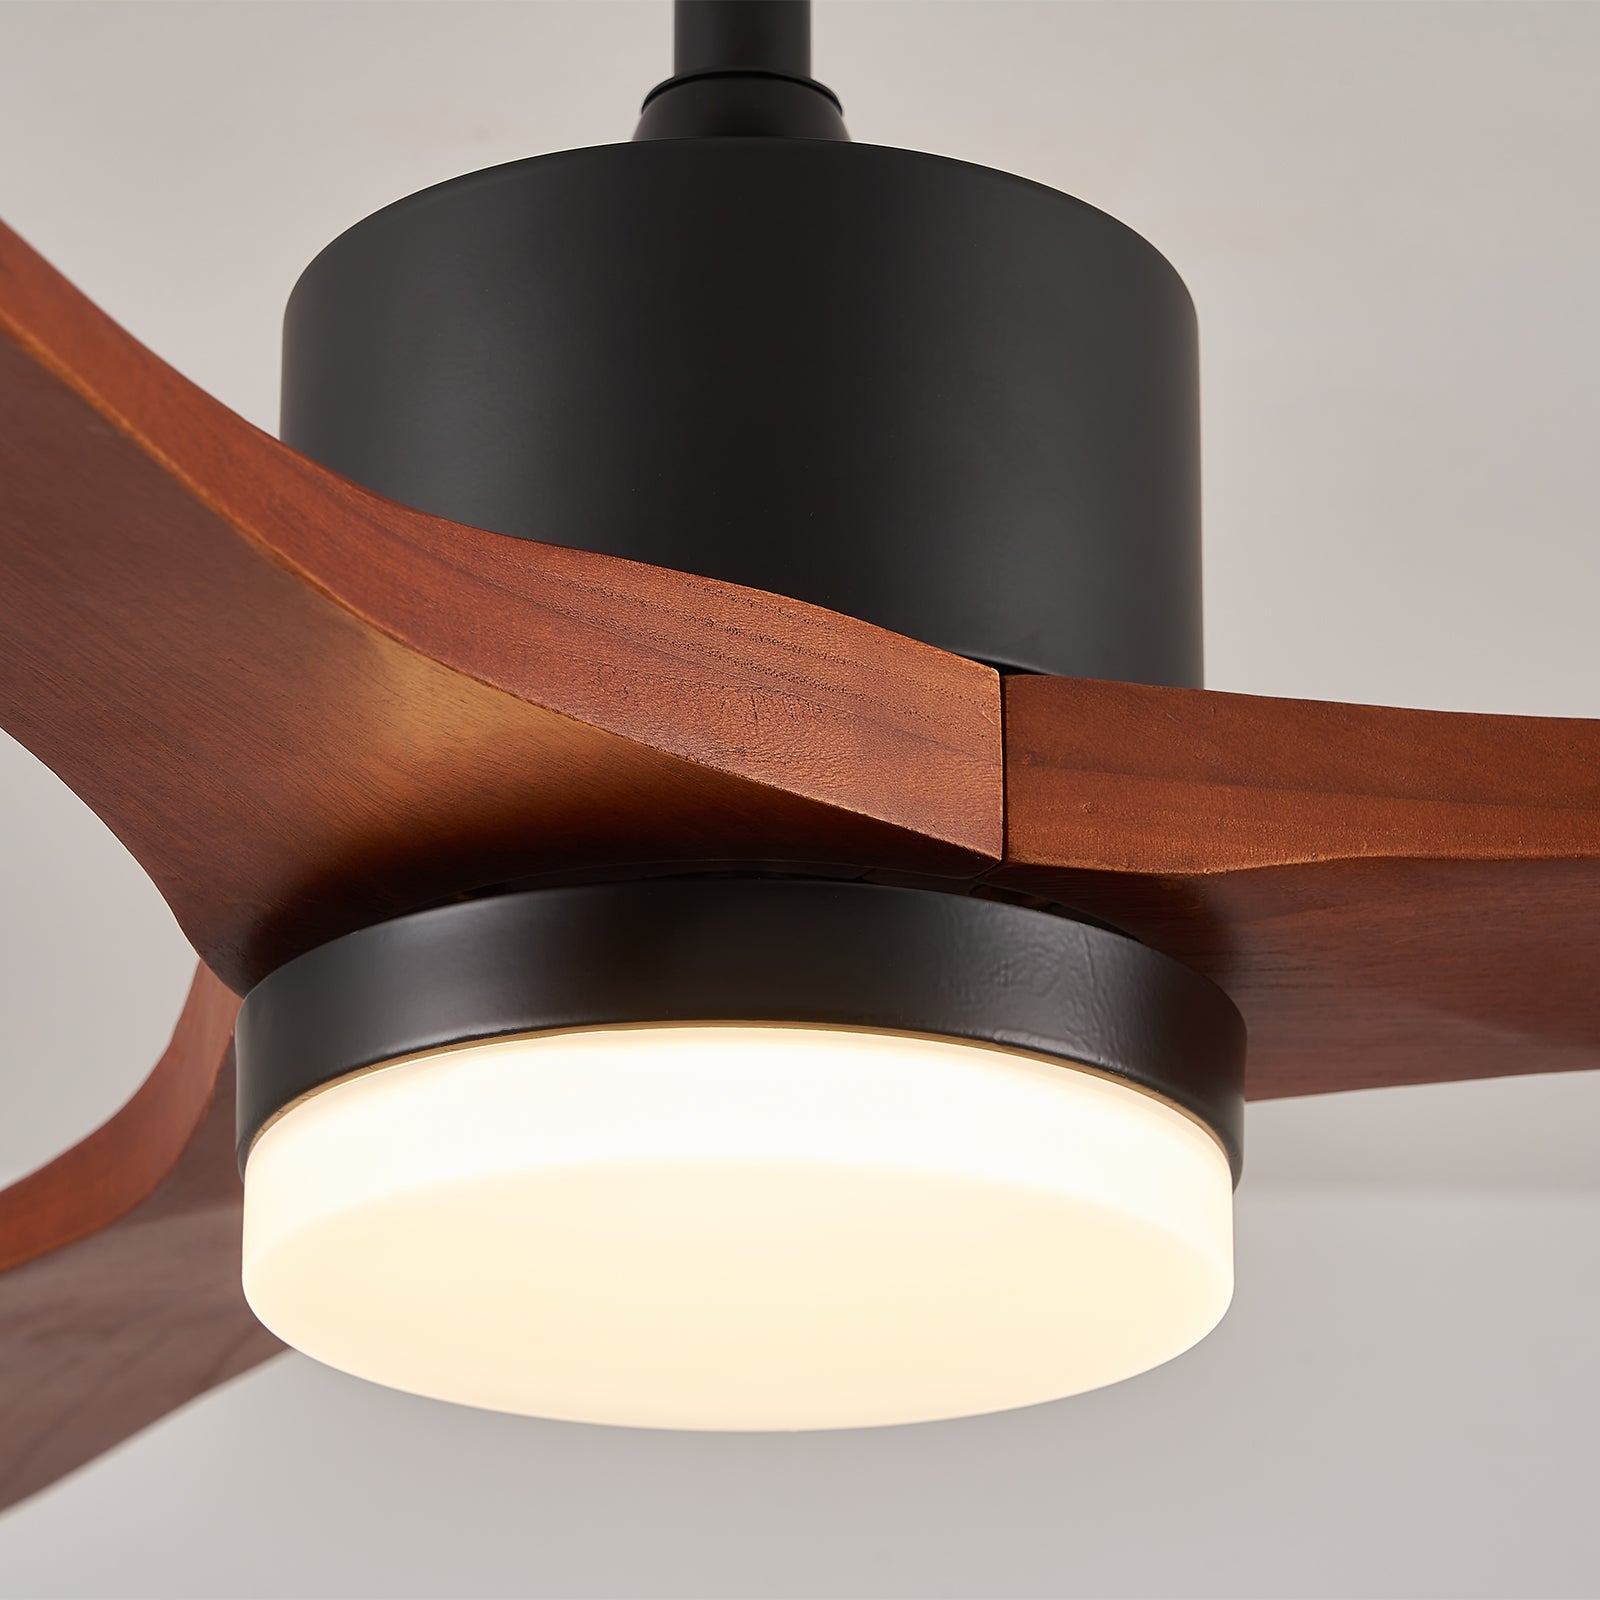 Rapha 52" Smart Ceiling Fan  APP-Controlled. LED: Dimming, Color Changing. Night Light. 24W LED